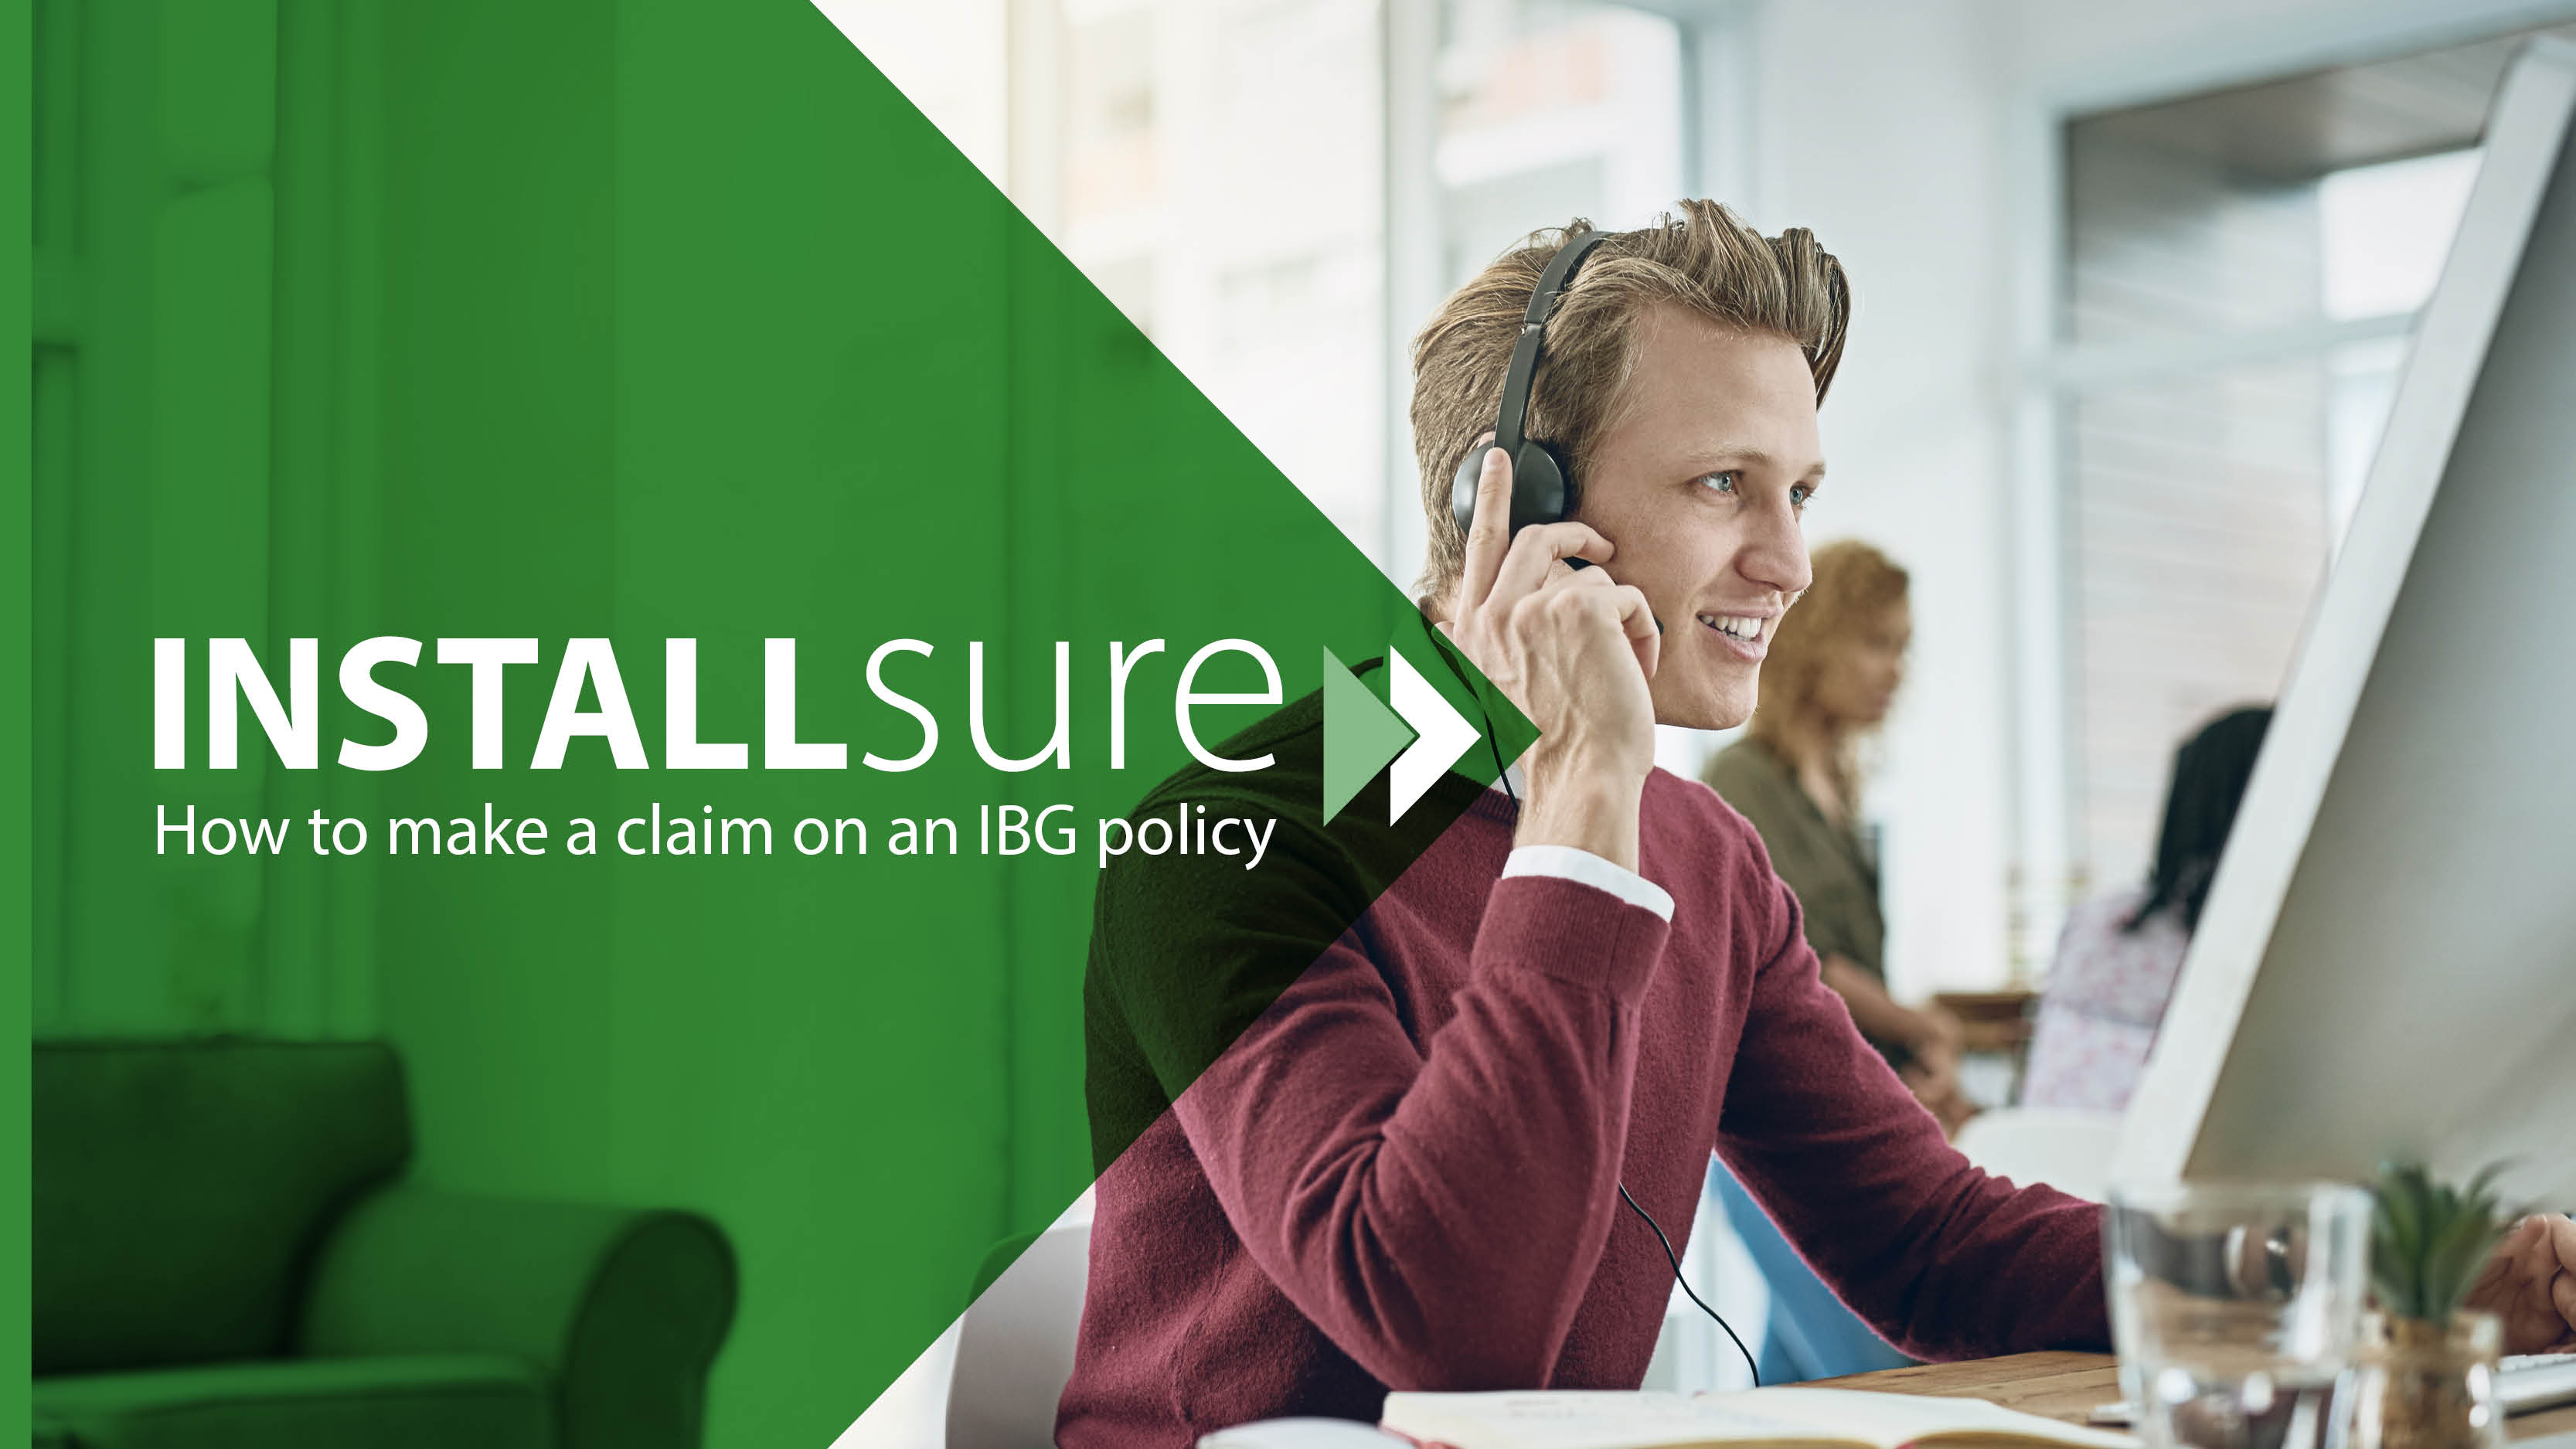 How to make a claim on an Installsure IBG policy